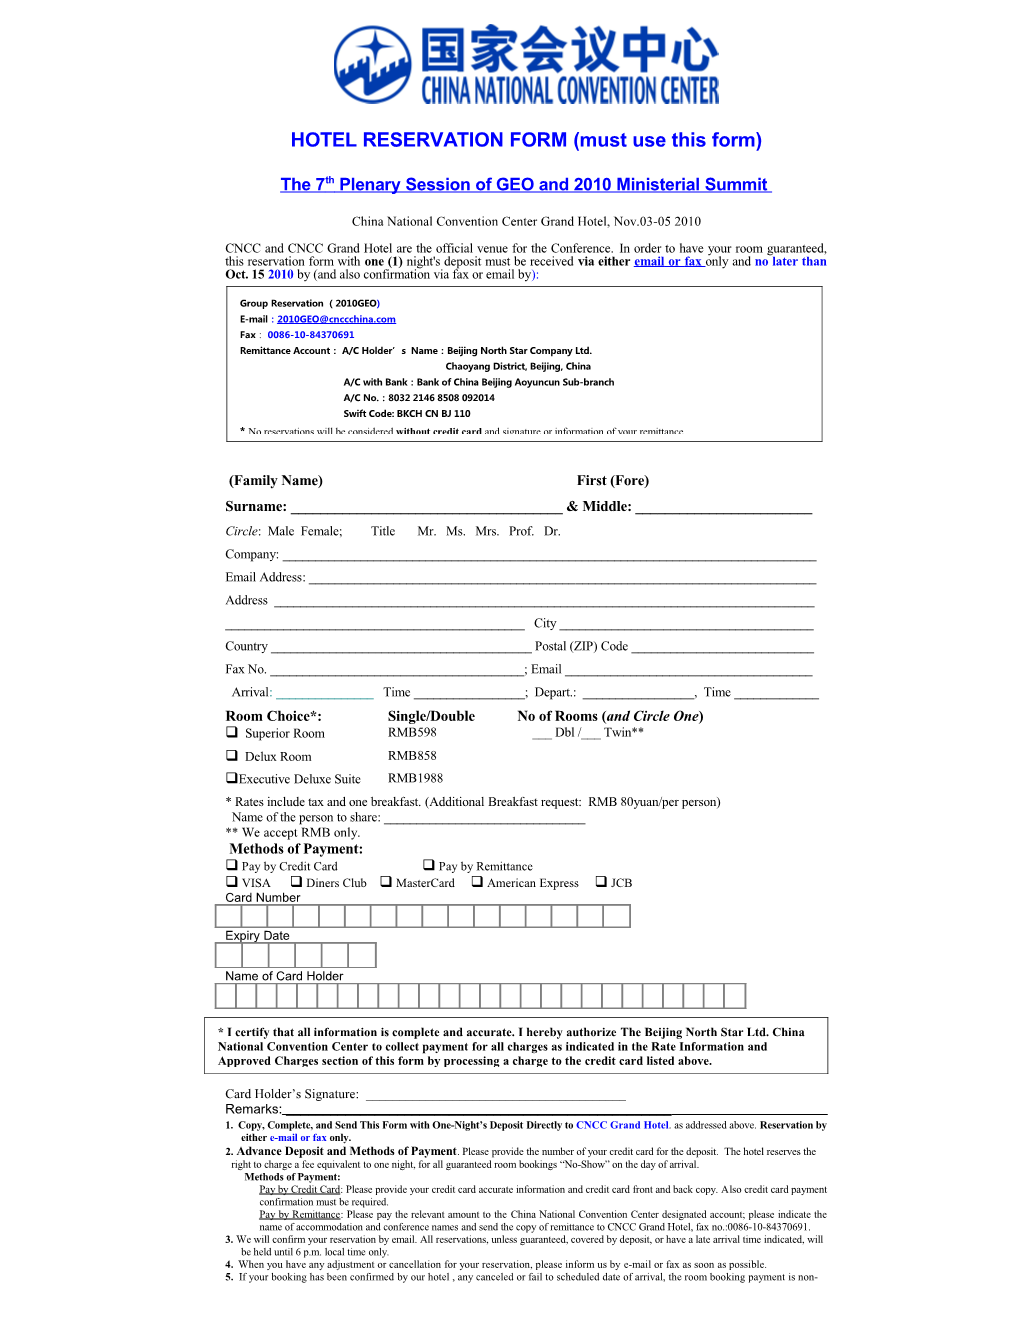 HOTEL RESERVATION FORM (Must Use This Form)